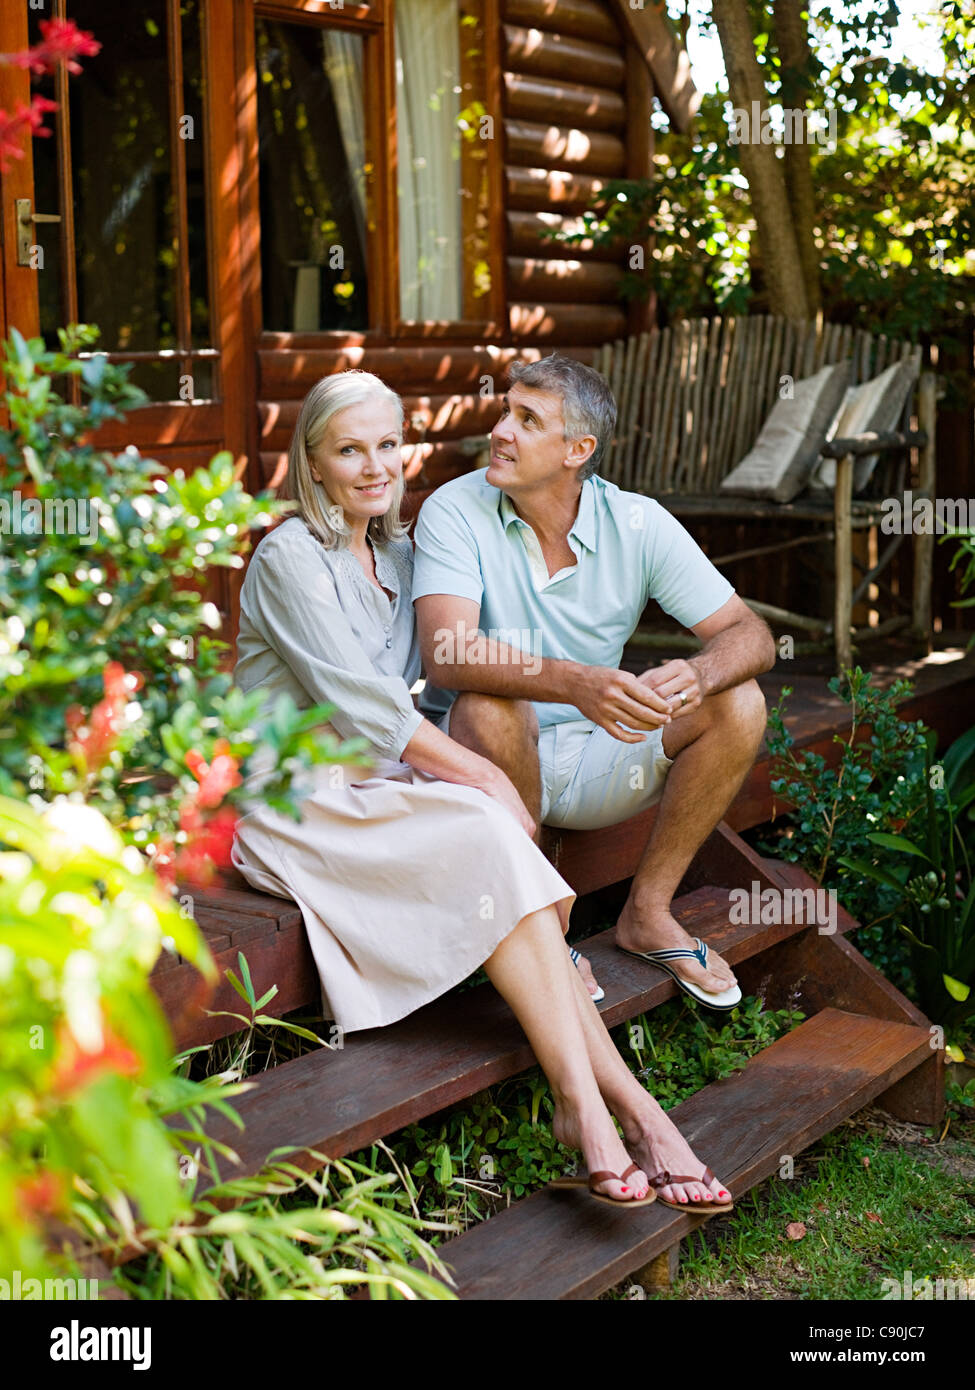 Couple sitting on porch steps in garden Stock Photo